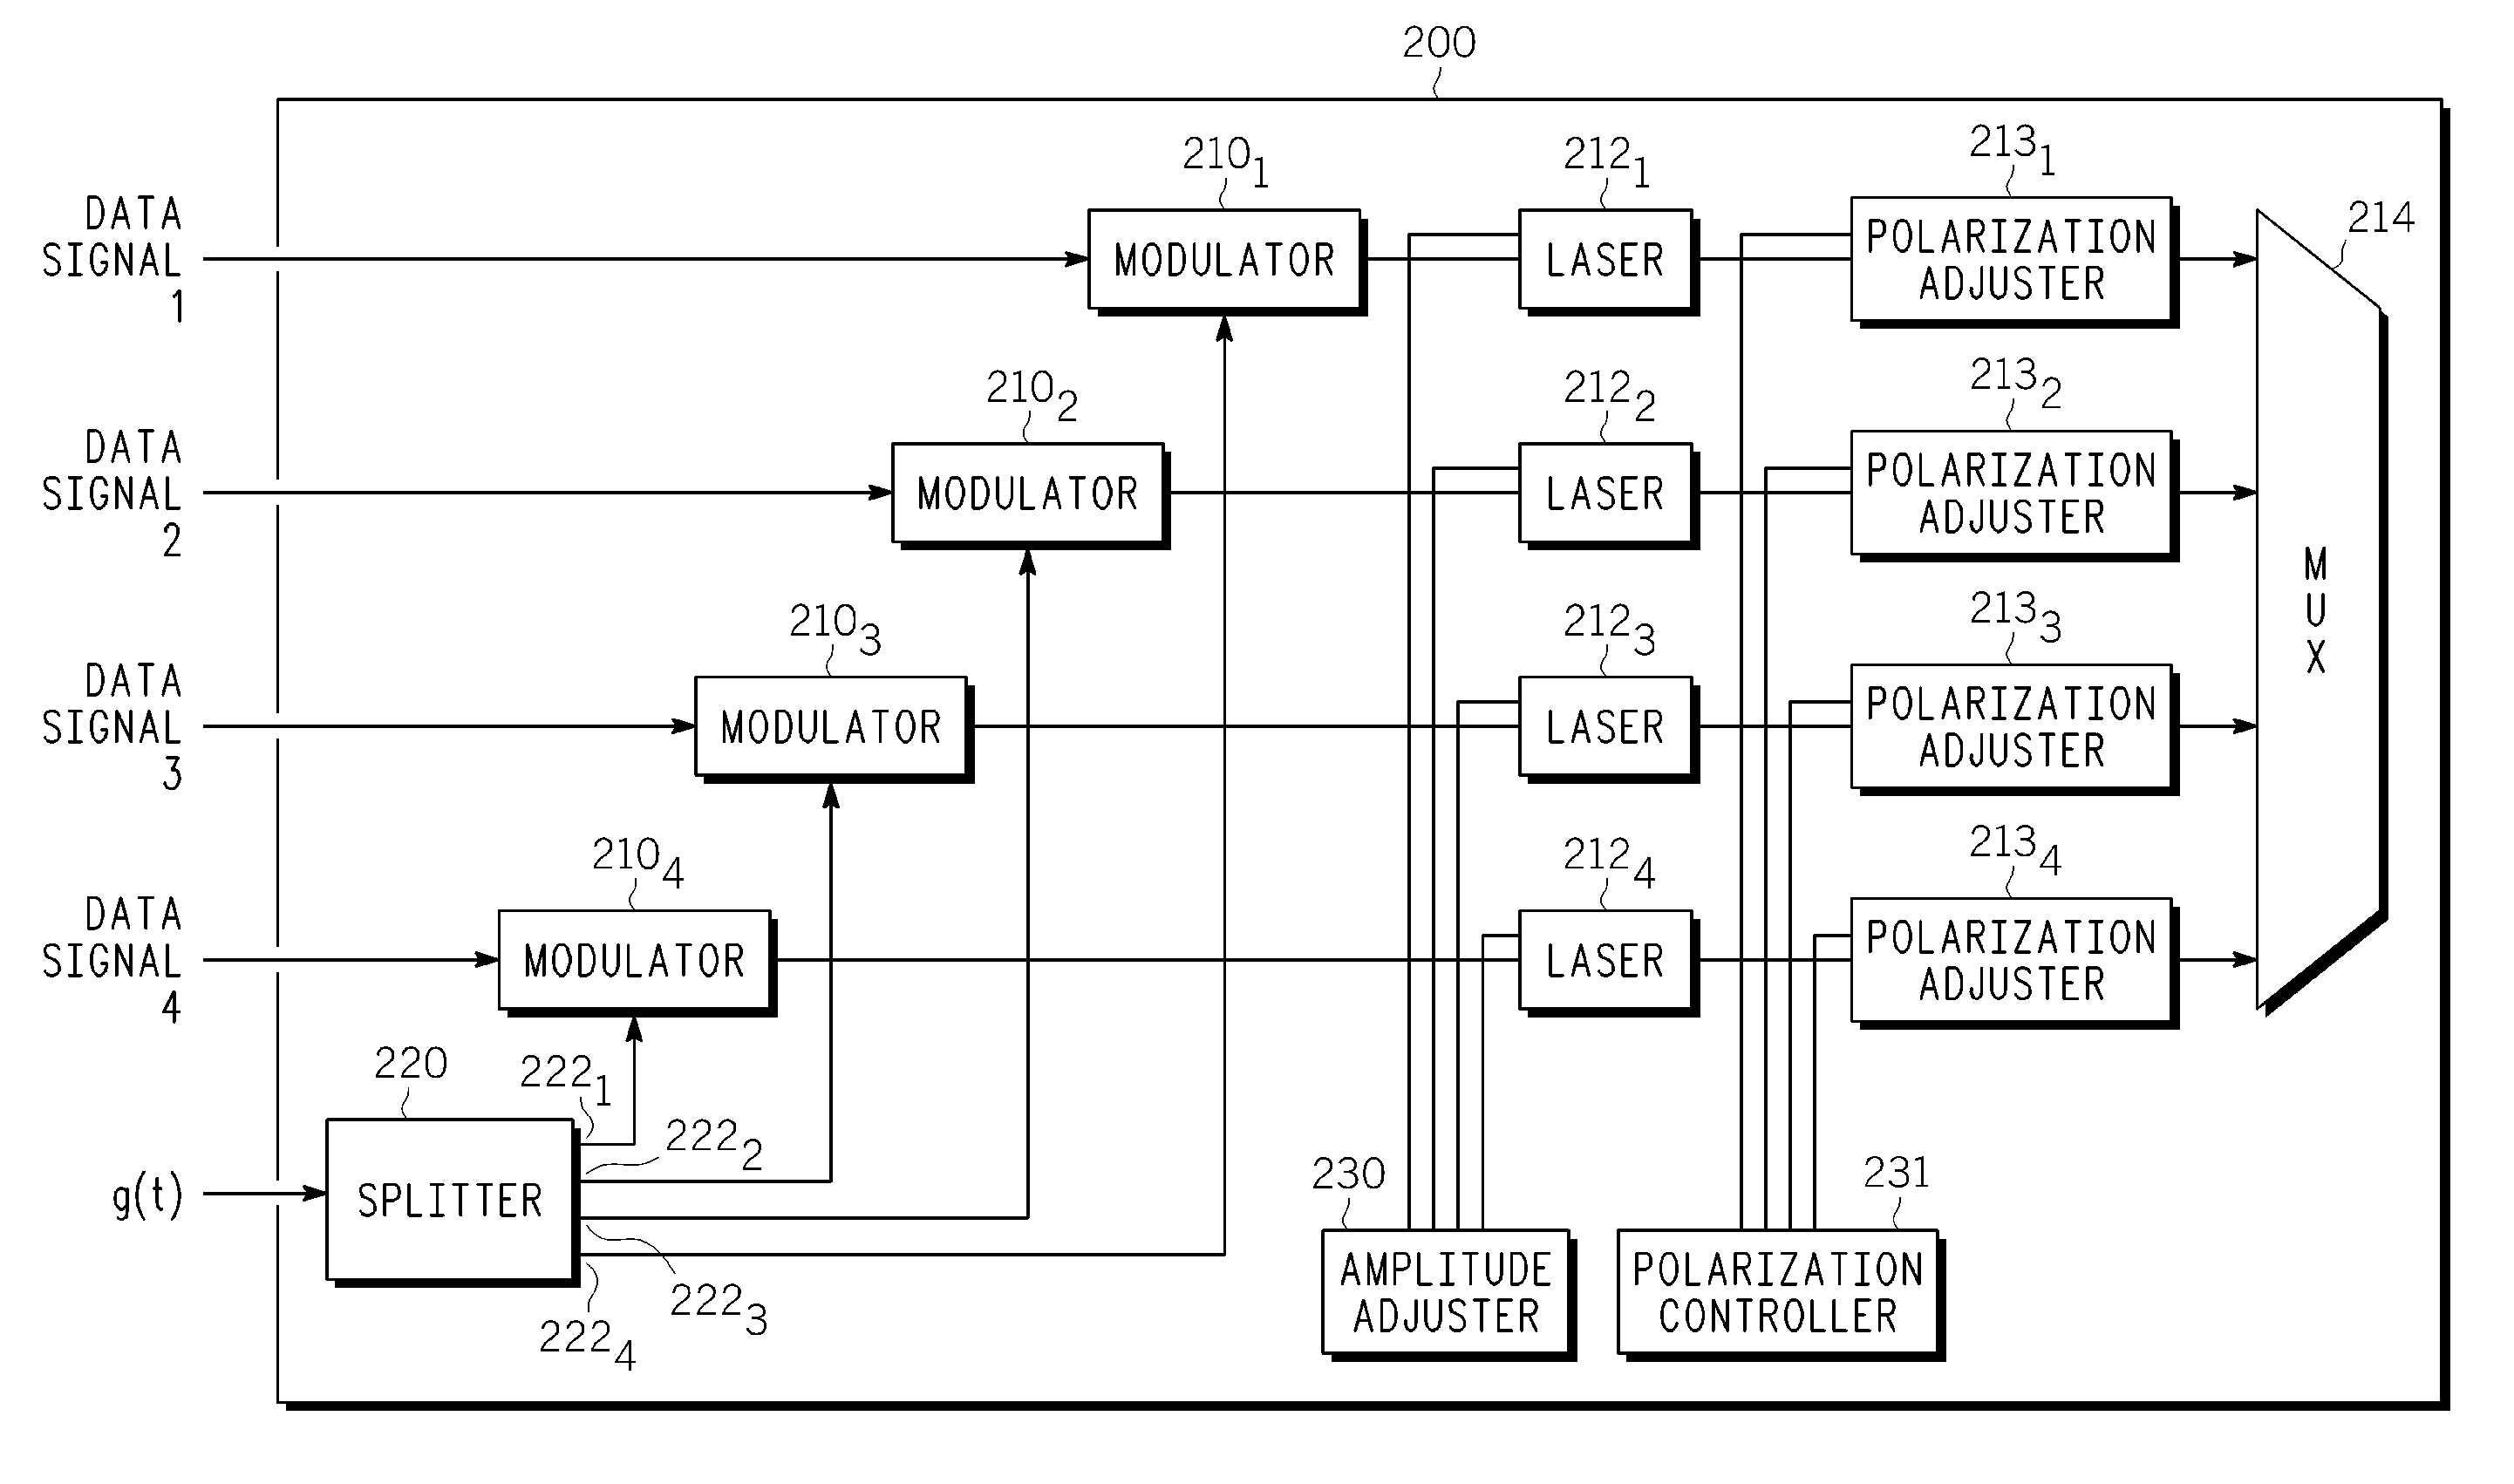 Method and apparatus for reducing crosstalk and nonlinear distortions induced by raman interactions in a wavelength division mulitplexed (WDM) optical communication system